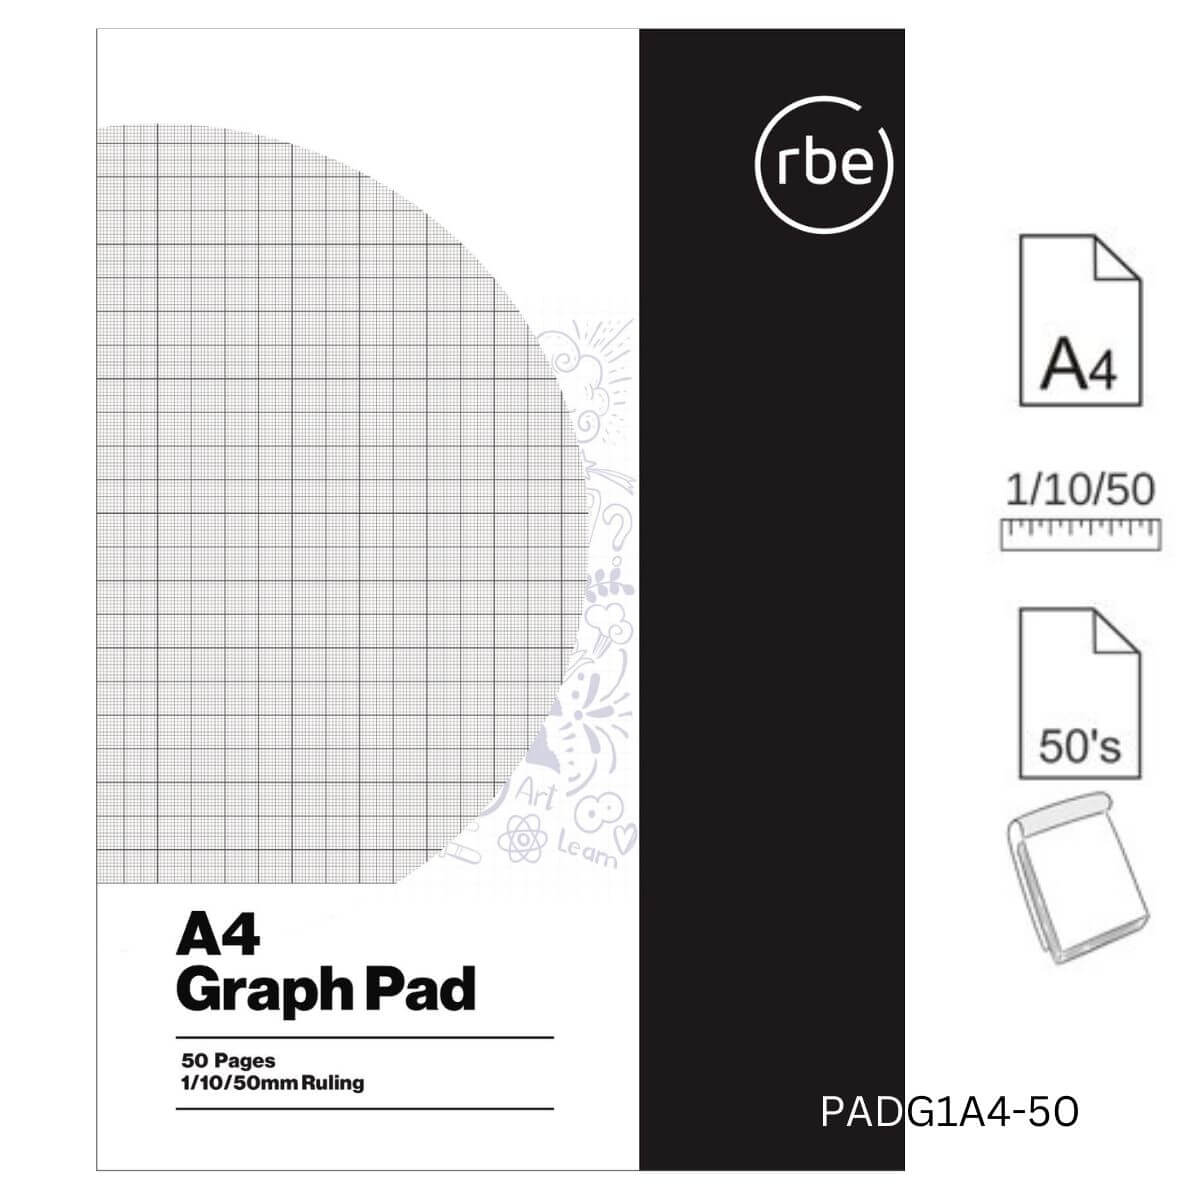 A4 Graph Pad - 1/10/50mm Ruling